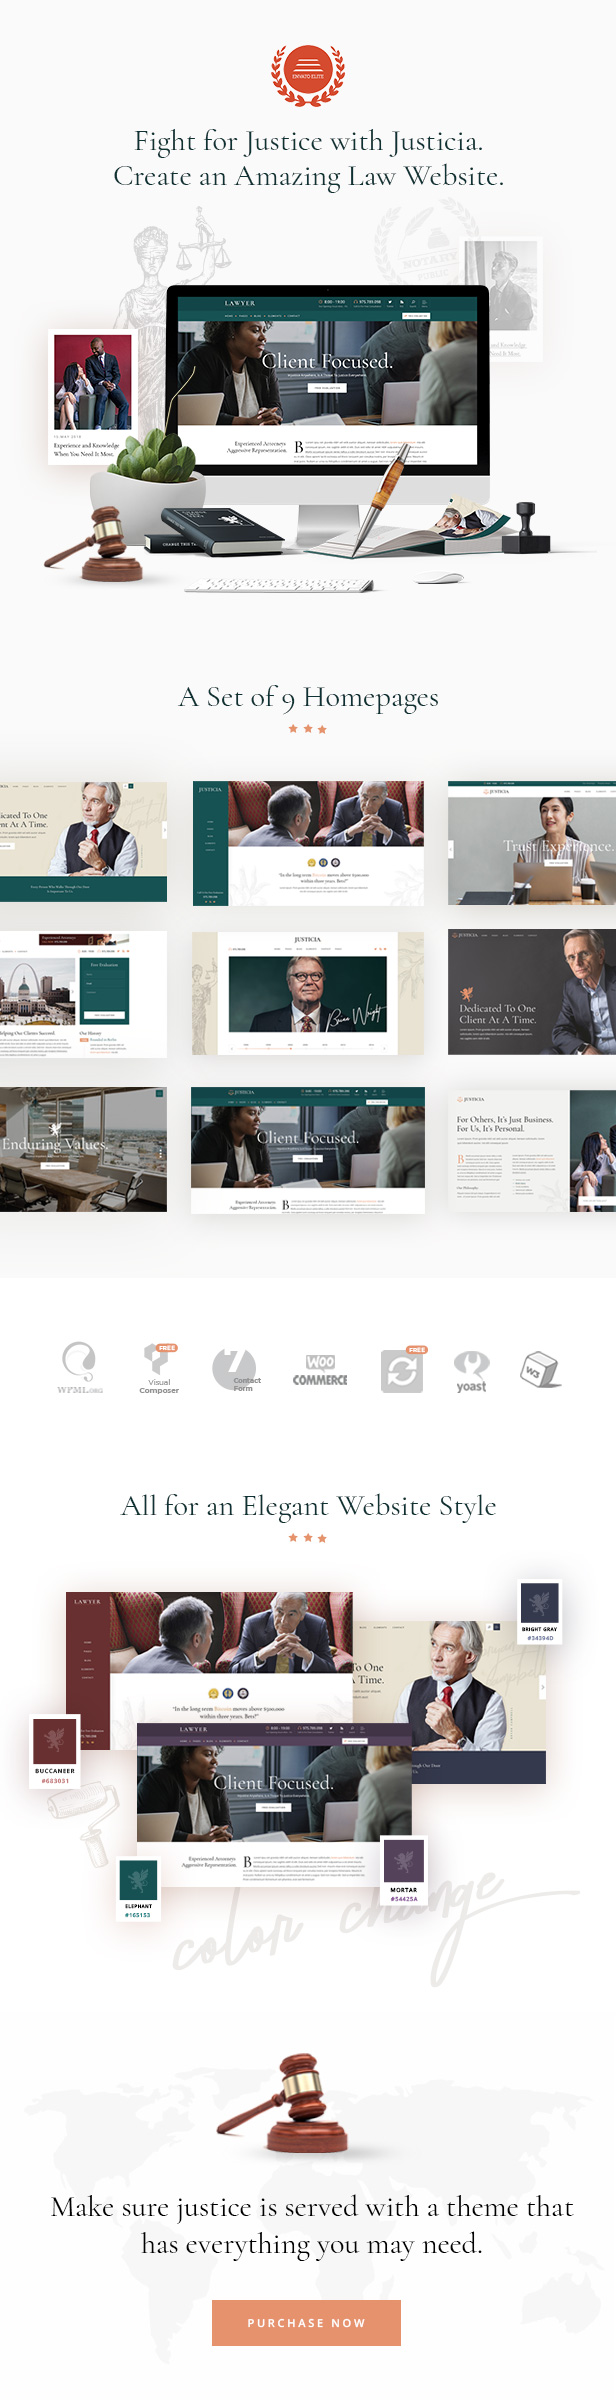 WordPress theme Justicia - Lawyer and Law Firm Theme (Business)